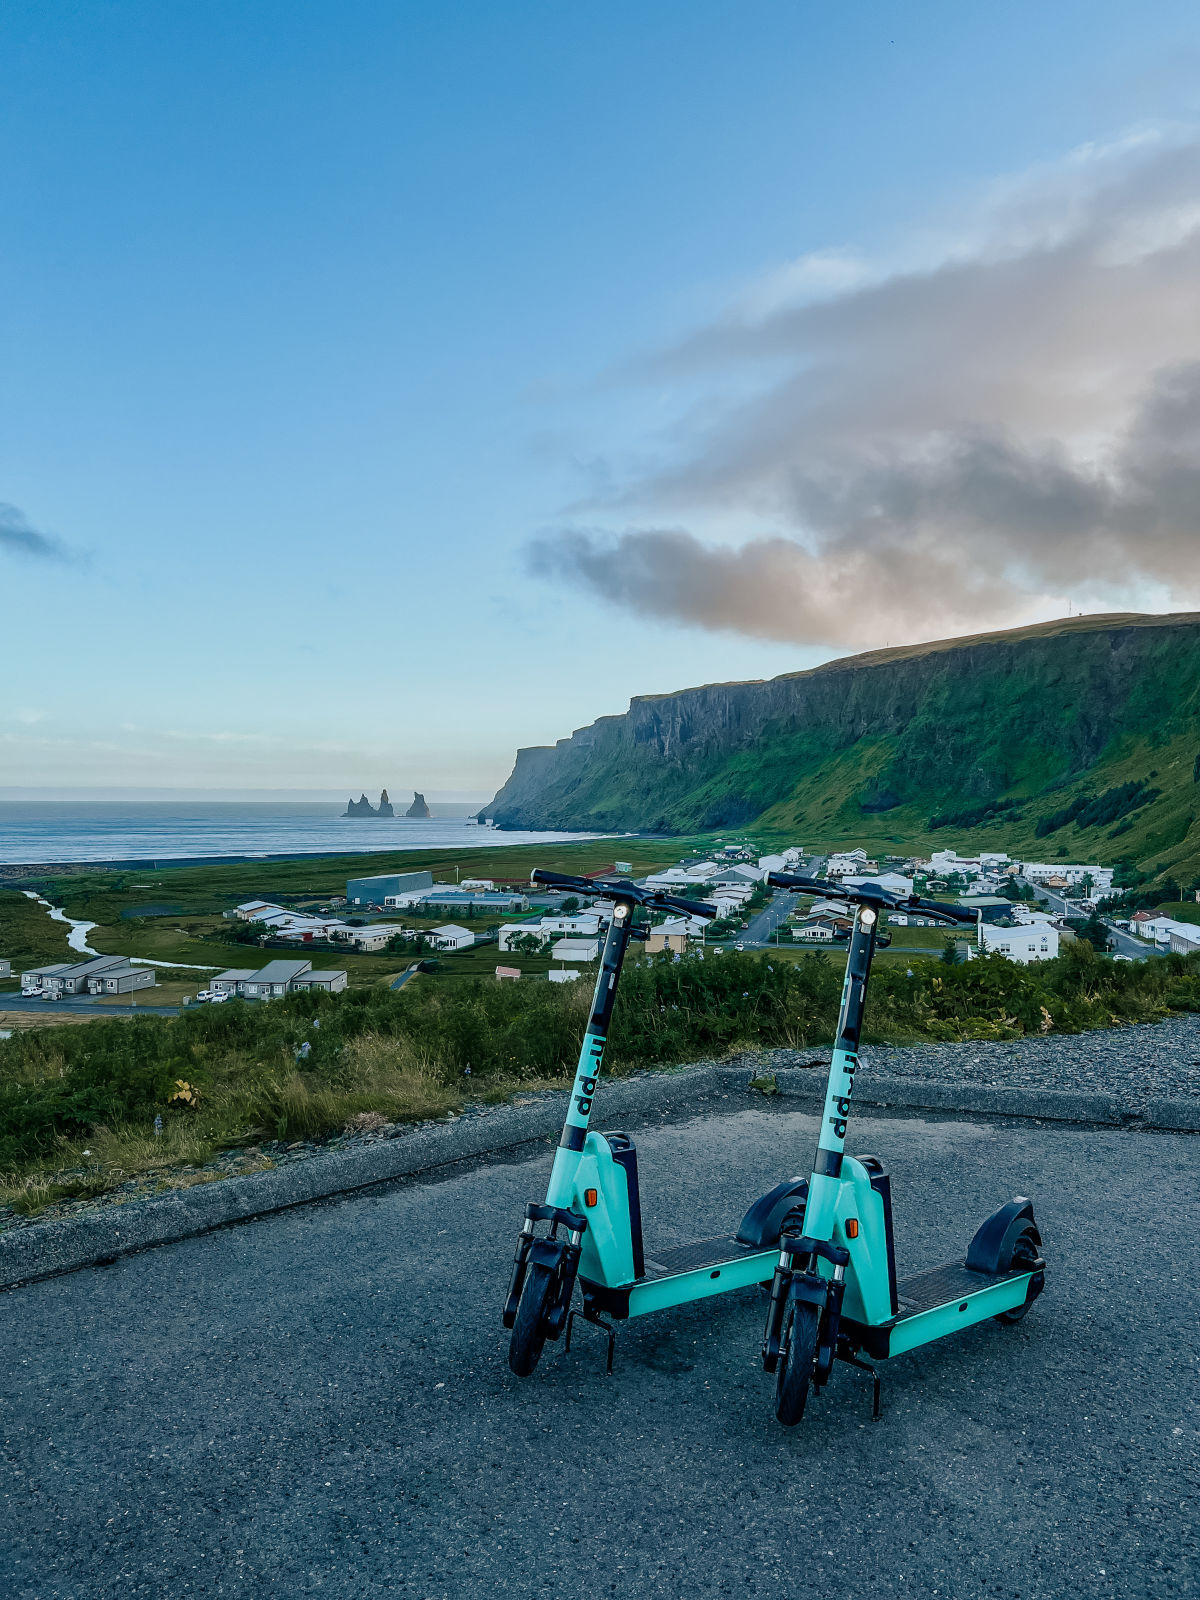 Celebrated for its awe-inspiring landscapes, Vík has been a silver screen favourite, featuring in numerous films and TV series. And now you can Hopp from one iconic location to another in this mesmerising town on Iceland's southern coast.